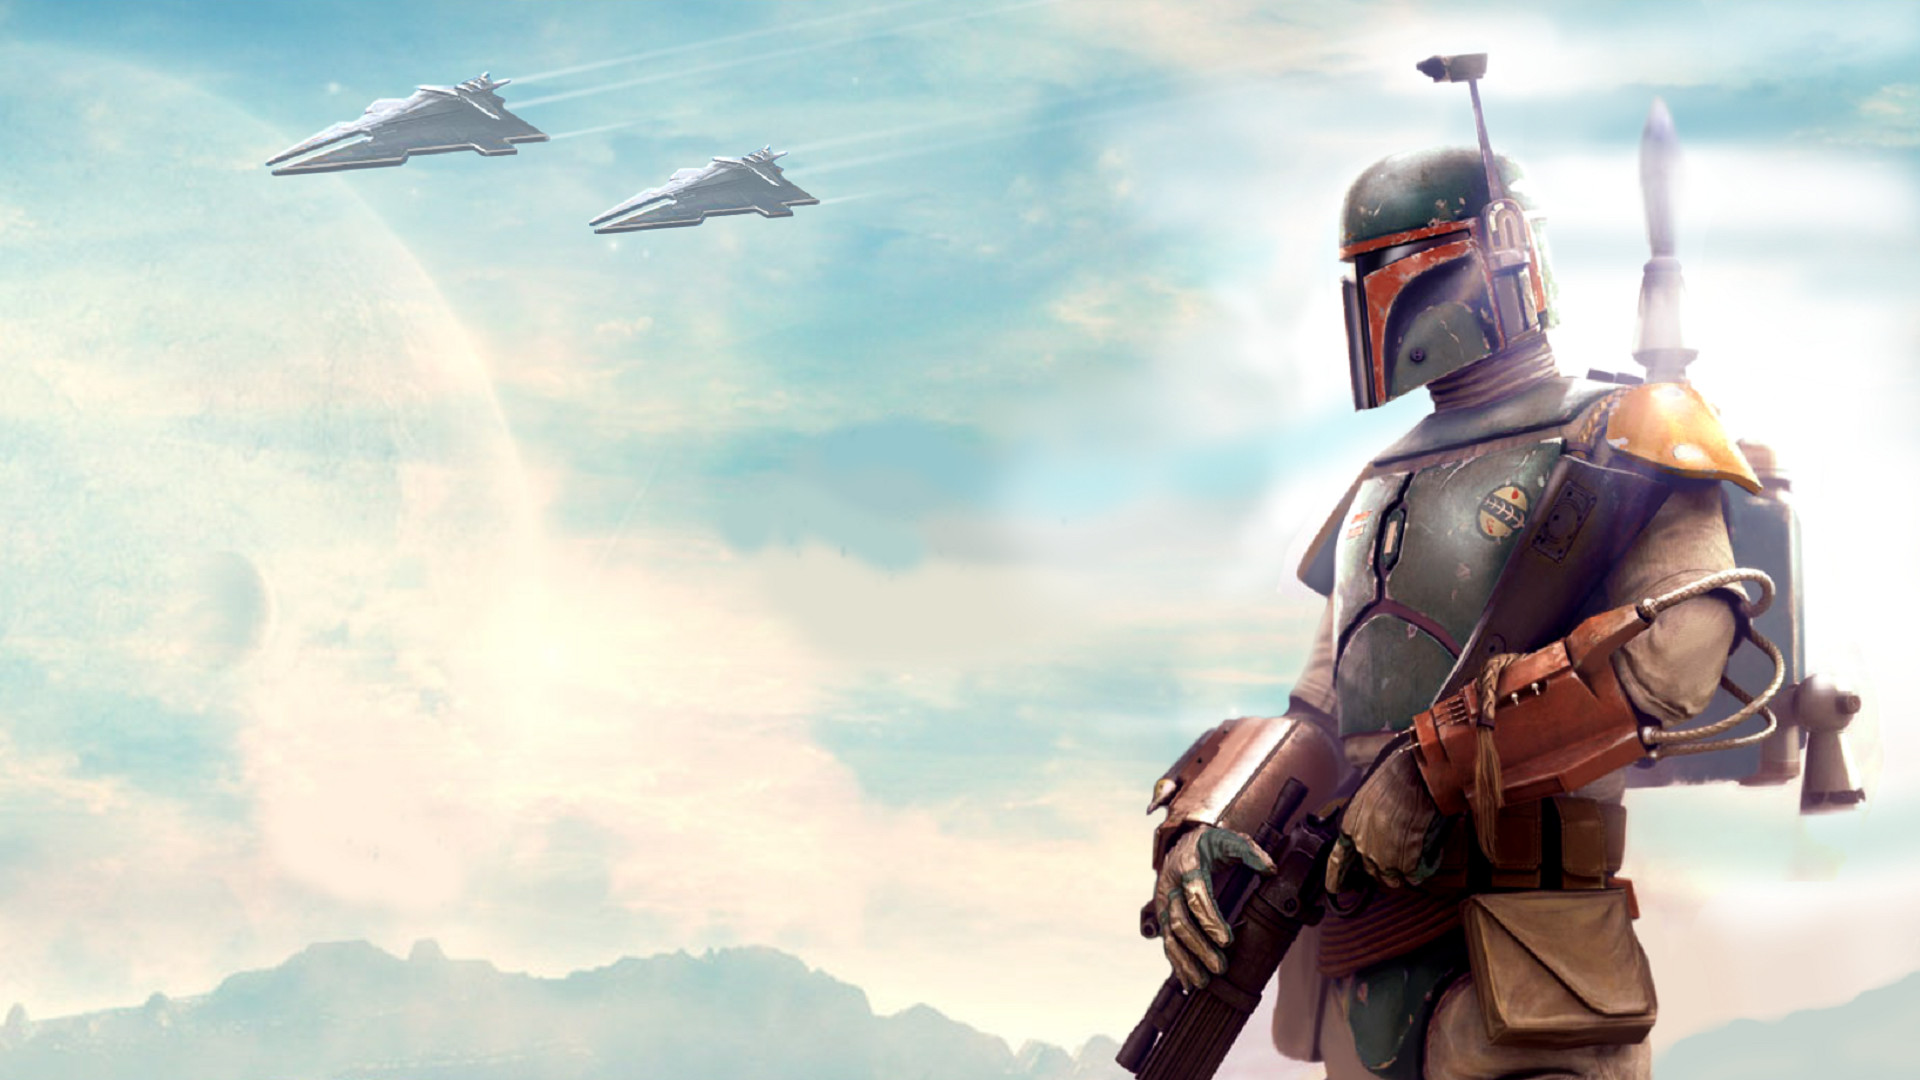 140+ Boba Fett HD Wallpapers and Backgrounds